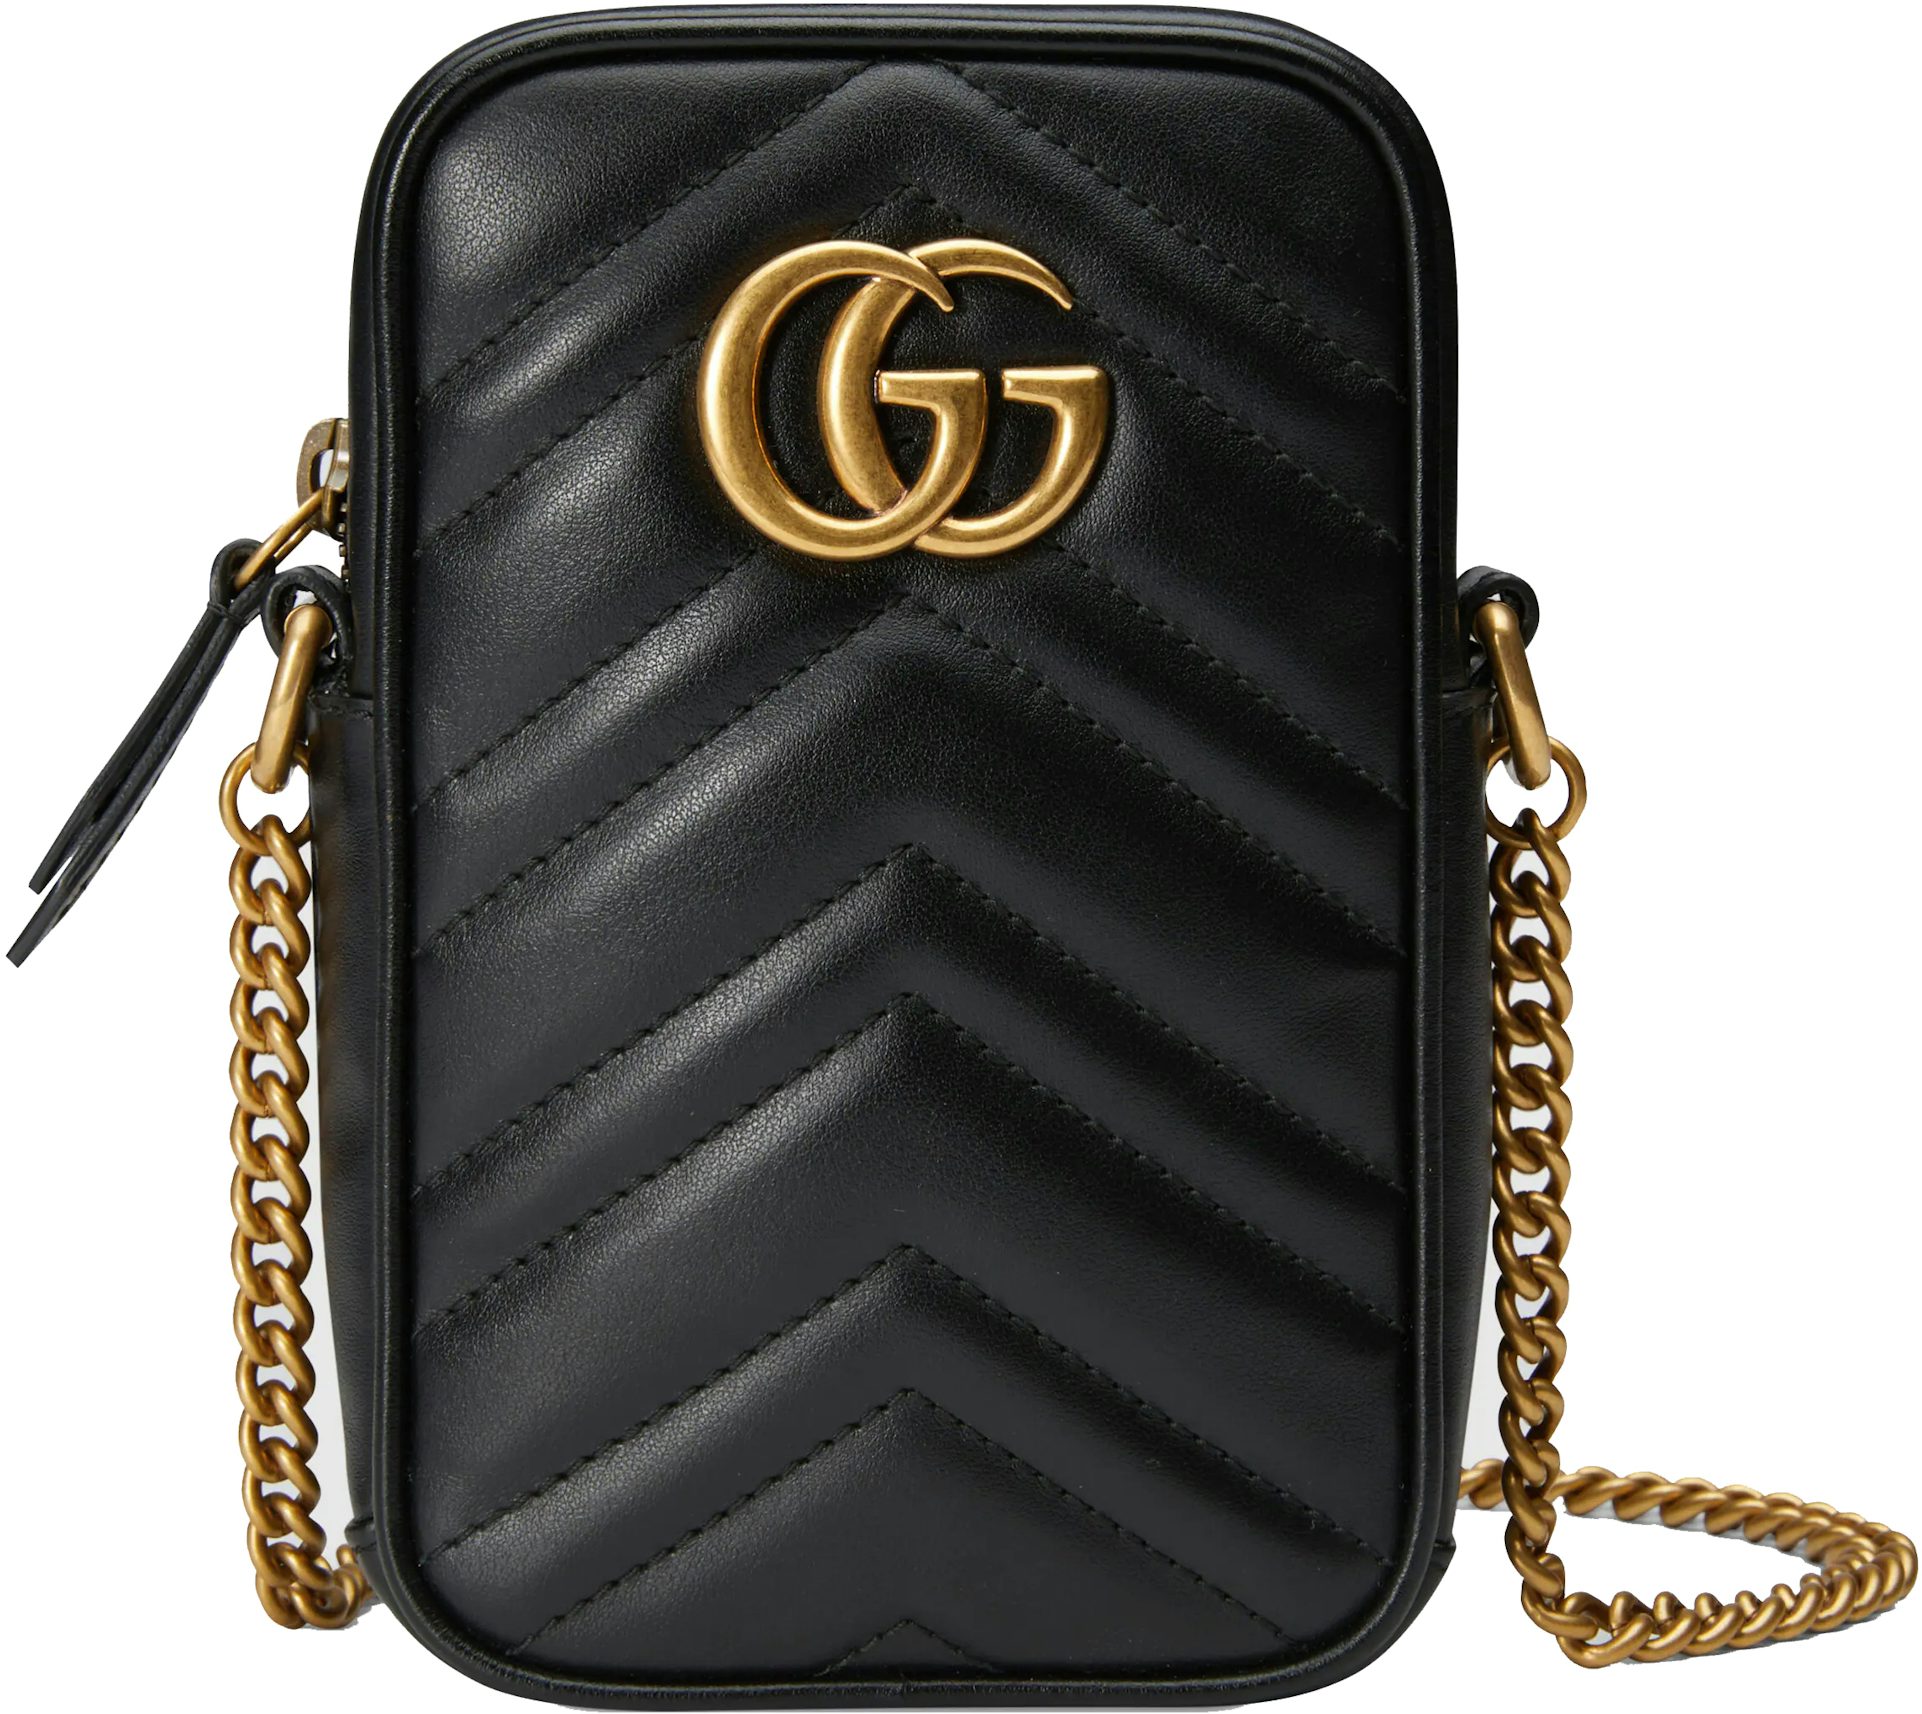 GG Marmont leather super mini bag in dusty pink chevron leather